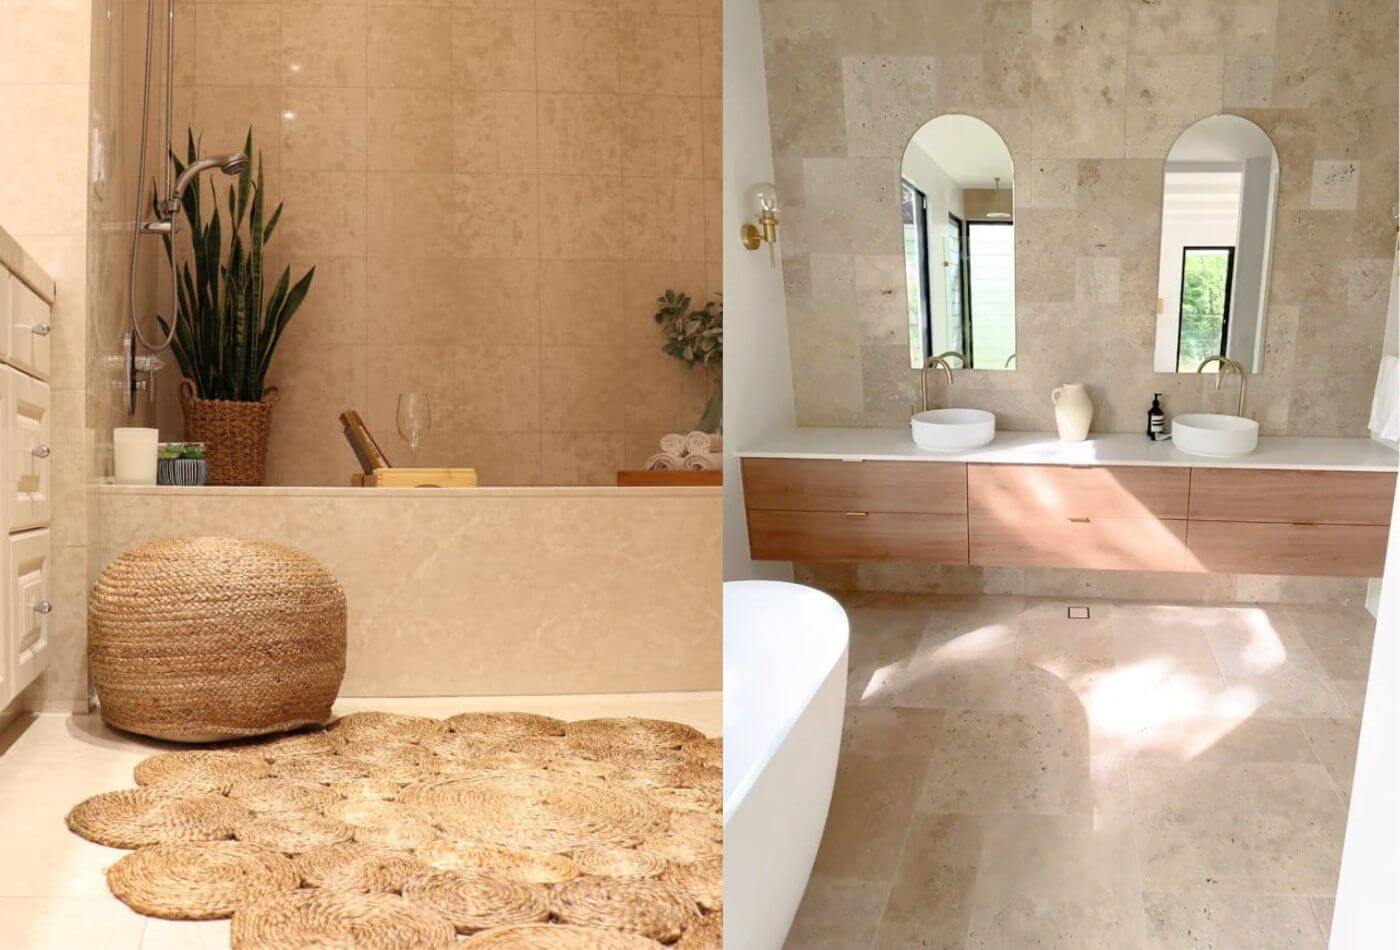 Get Contemporary Travertine Bathrooms Without Breaking the Bank